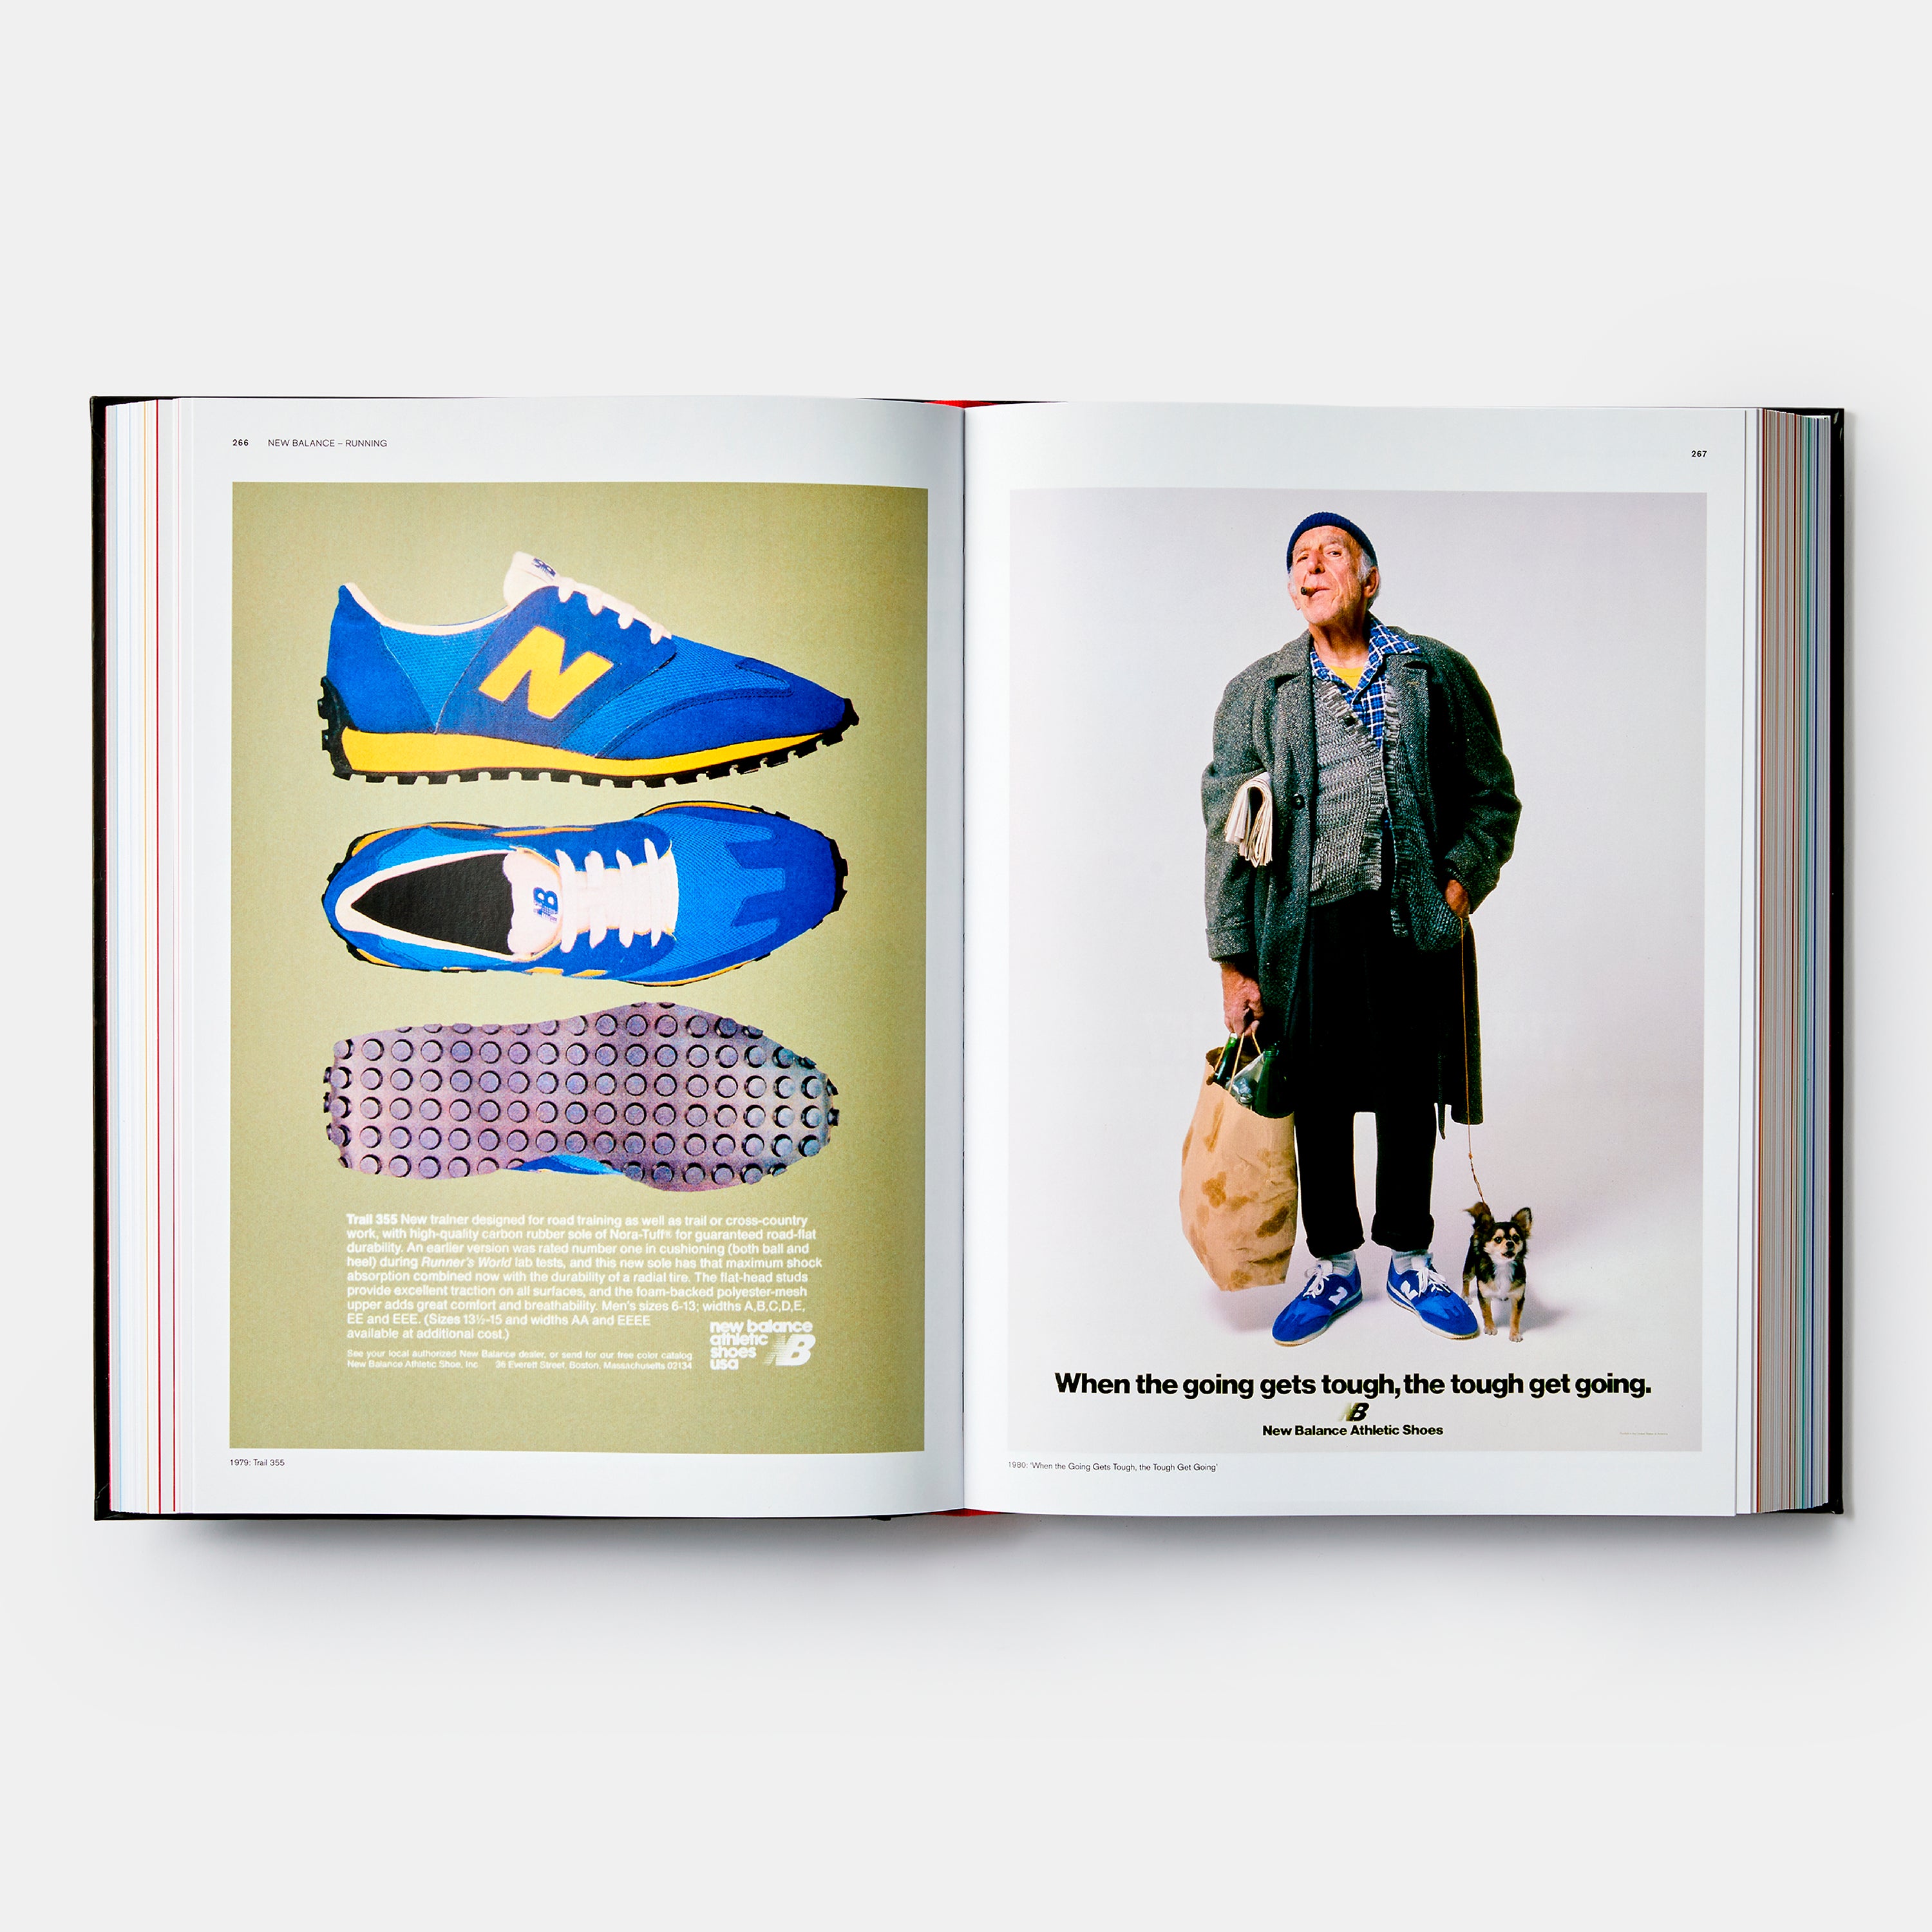 Sneaker Freaker "Soled Out" - The Golden Age Of Sneaker Advertising